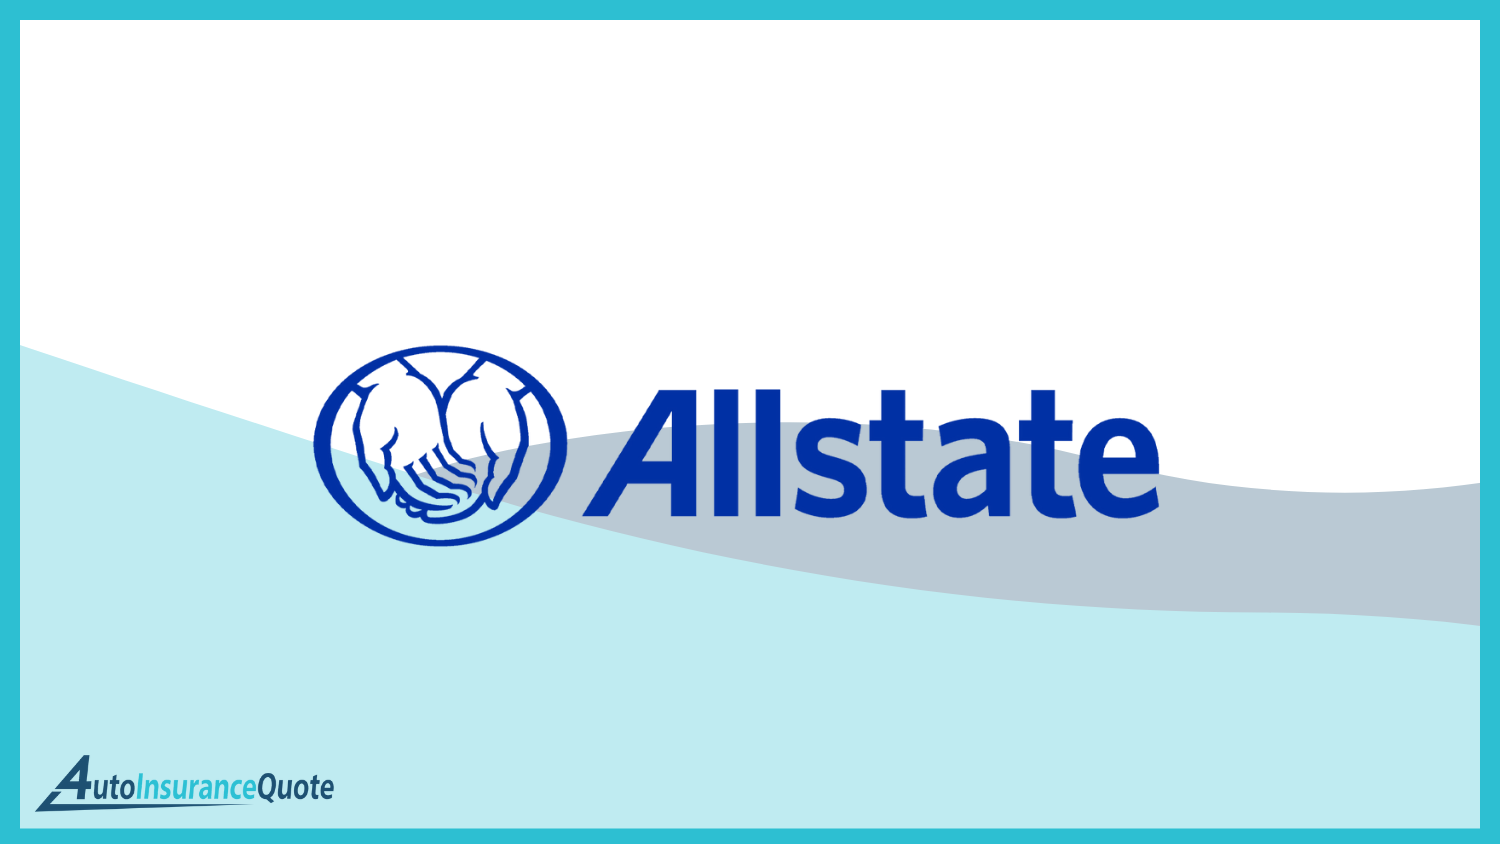 Allstate: 10 Best Auto Insurance Companies After a DUI